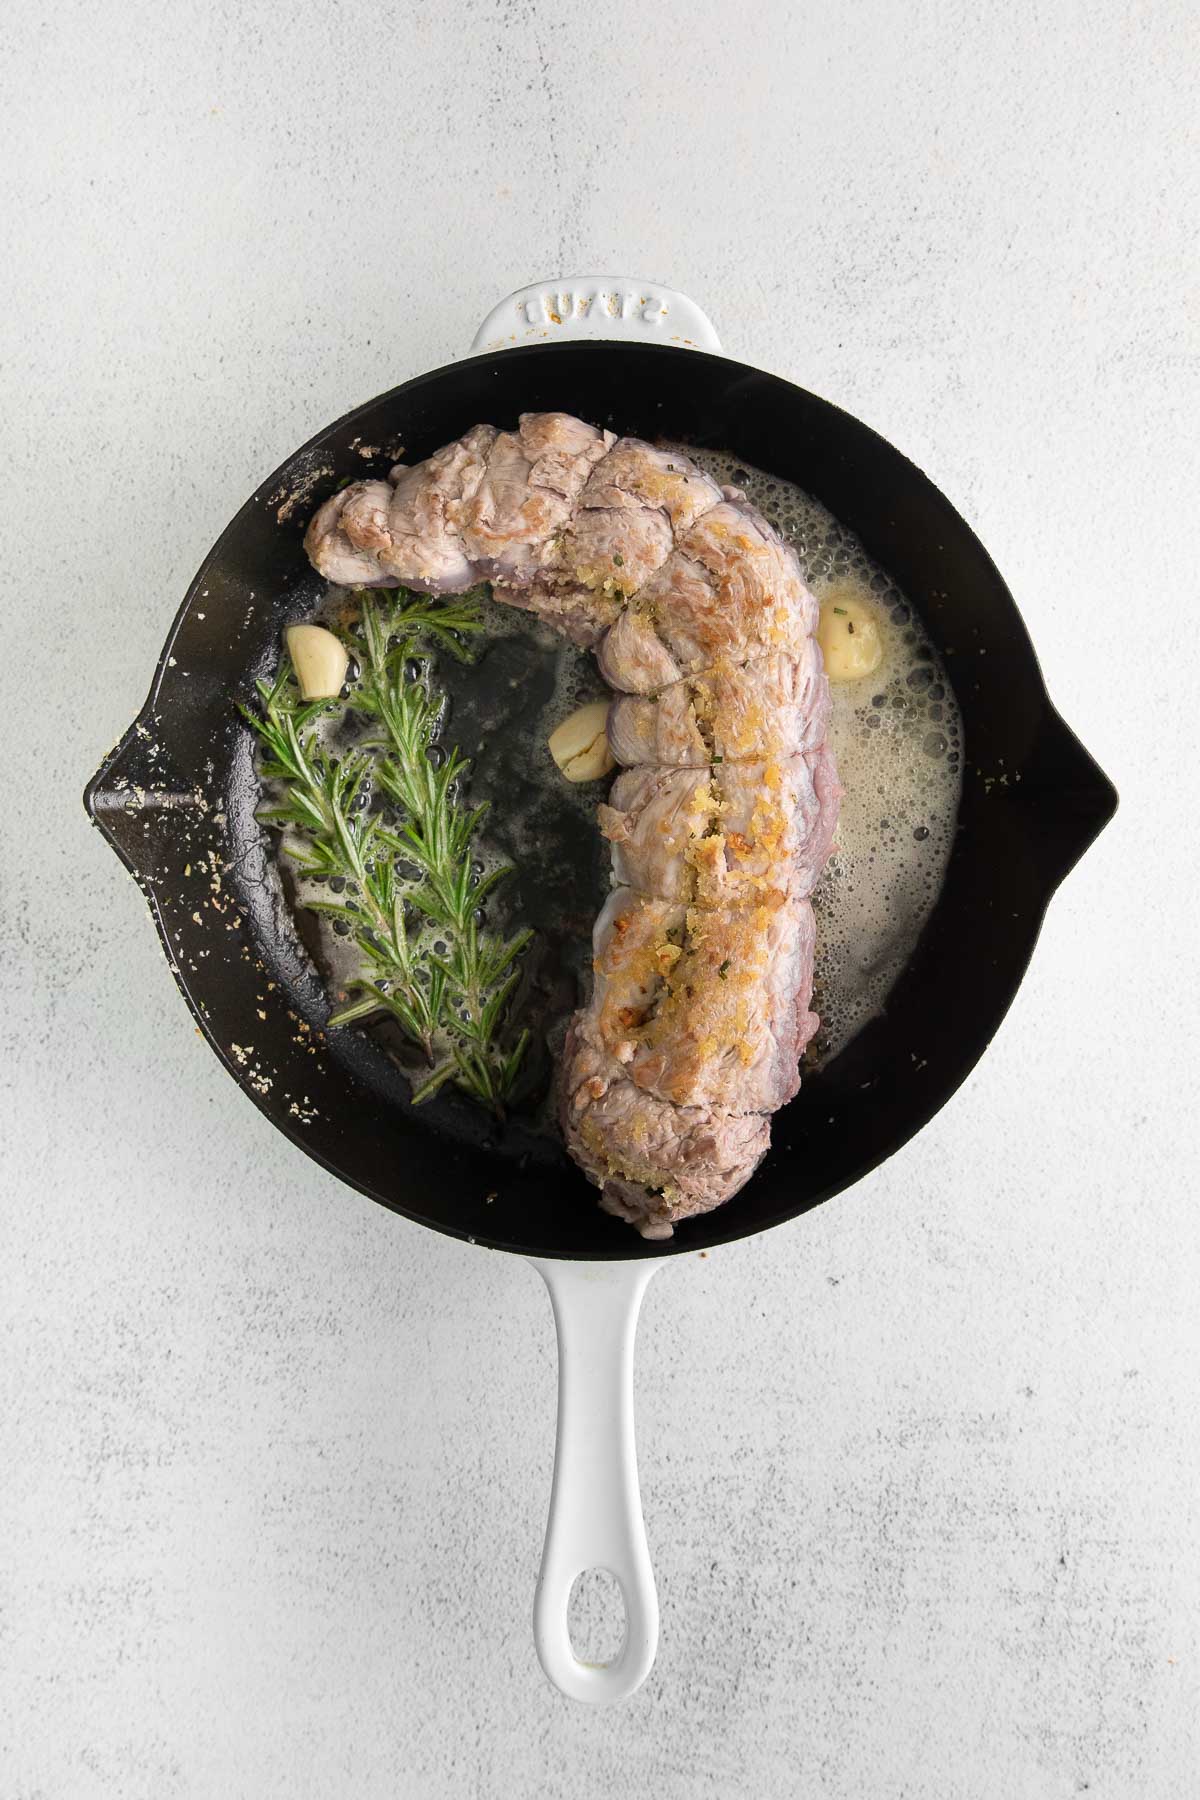 pork tenderloin cooking in a cast iron pan with garlic cloves and rosemary sprigs